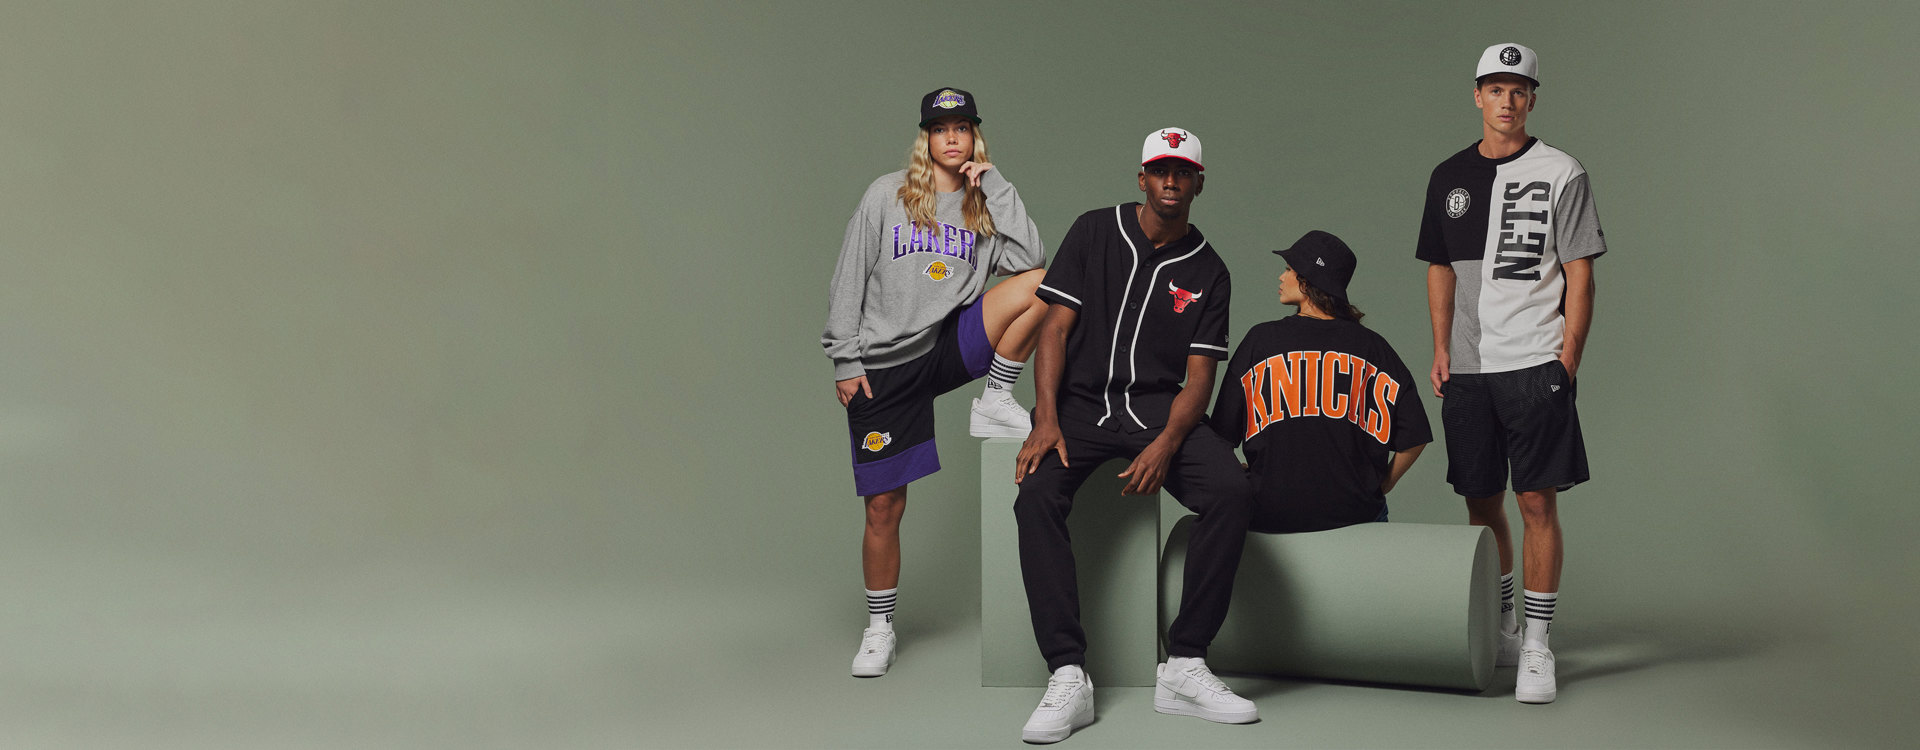 New Era - NBA Headwear and Clothing Collection.